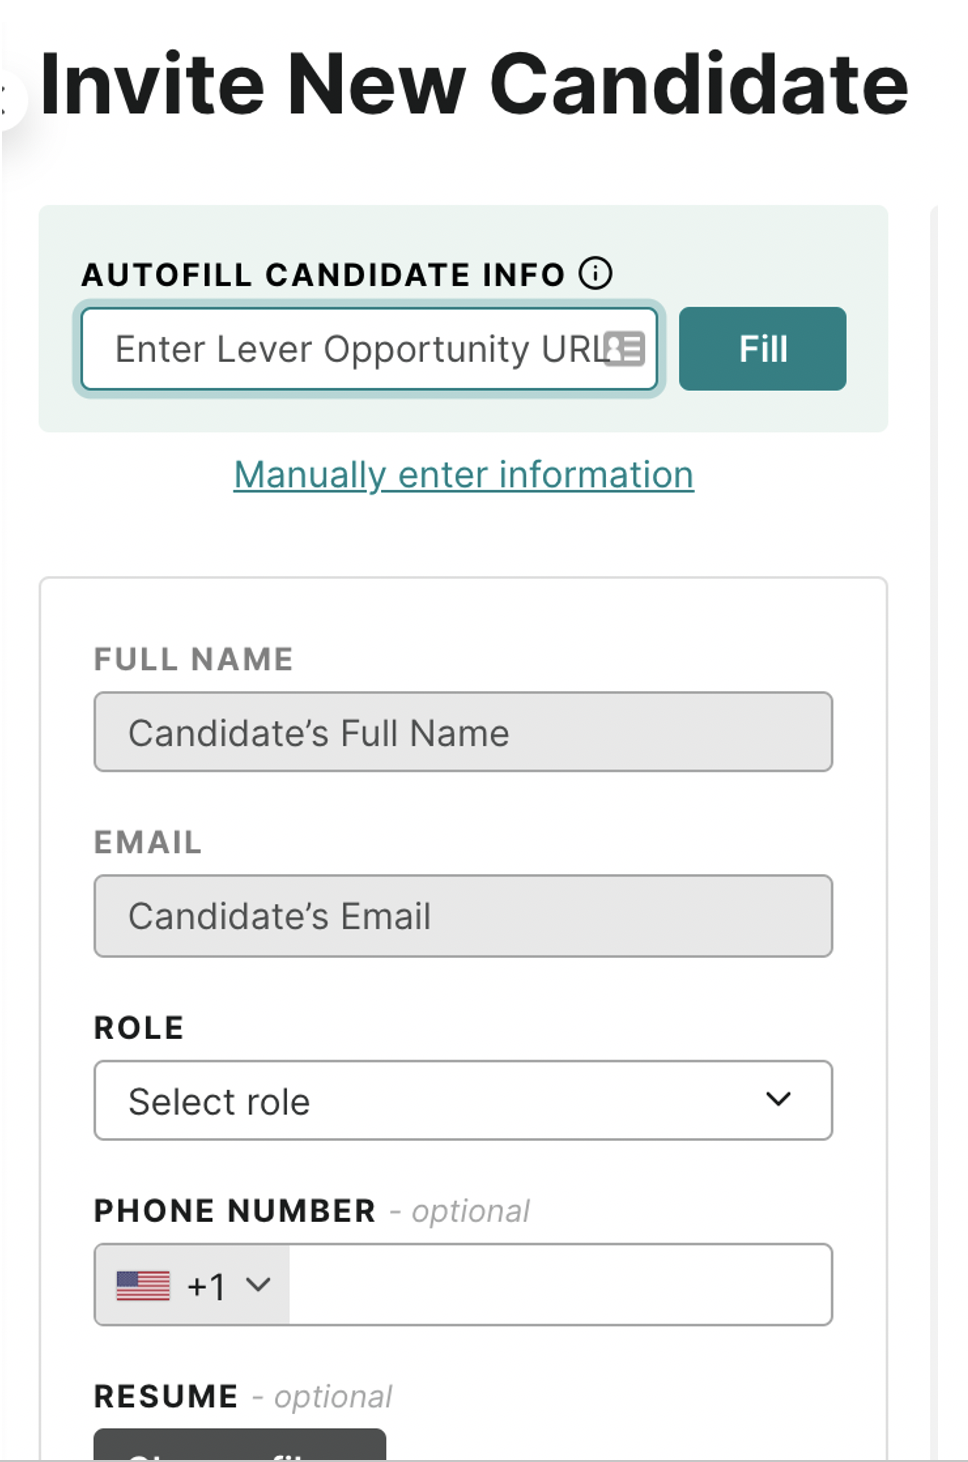 Karat invite new candidate modal showing autofill candidate info and contact information fields